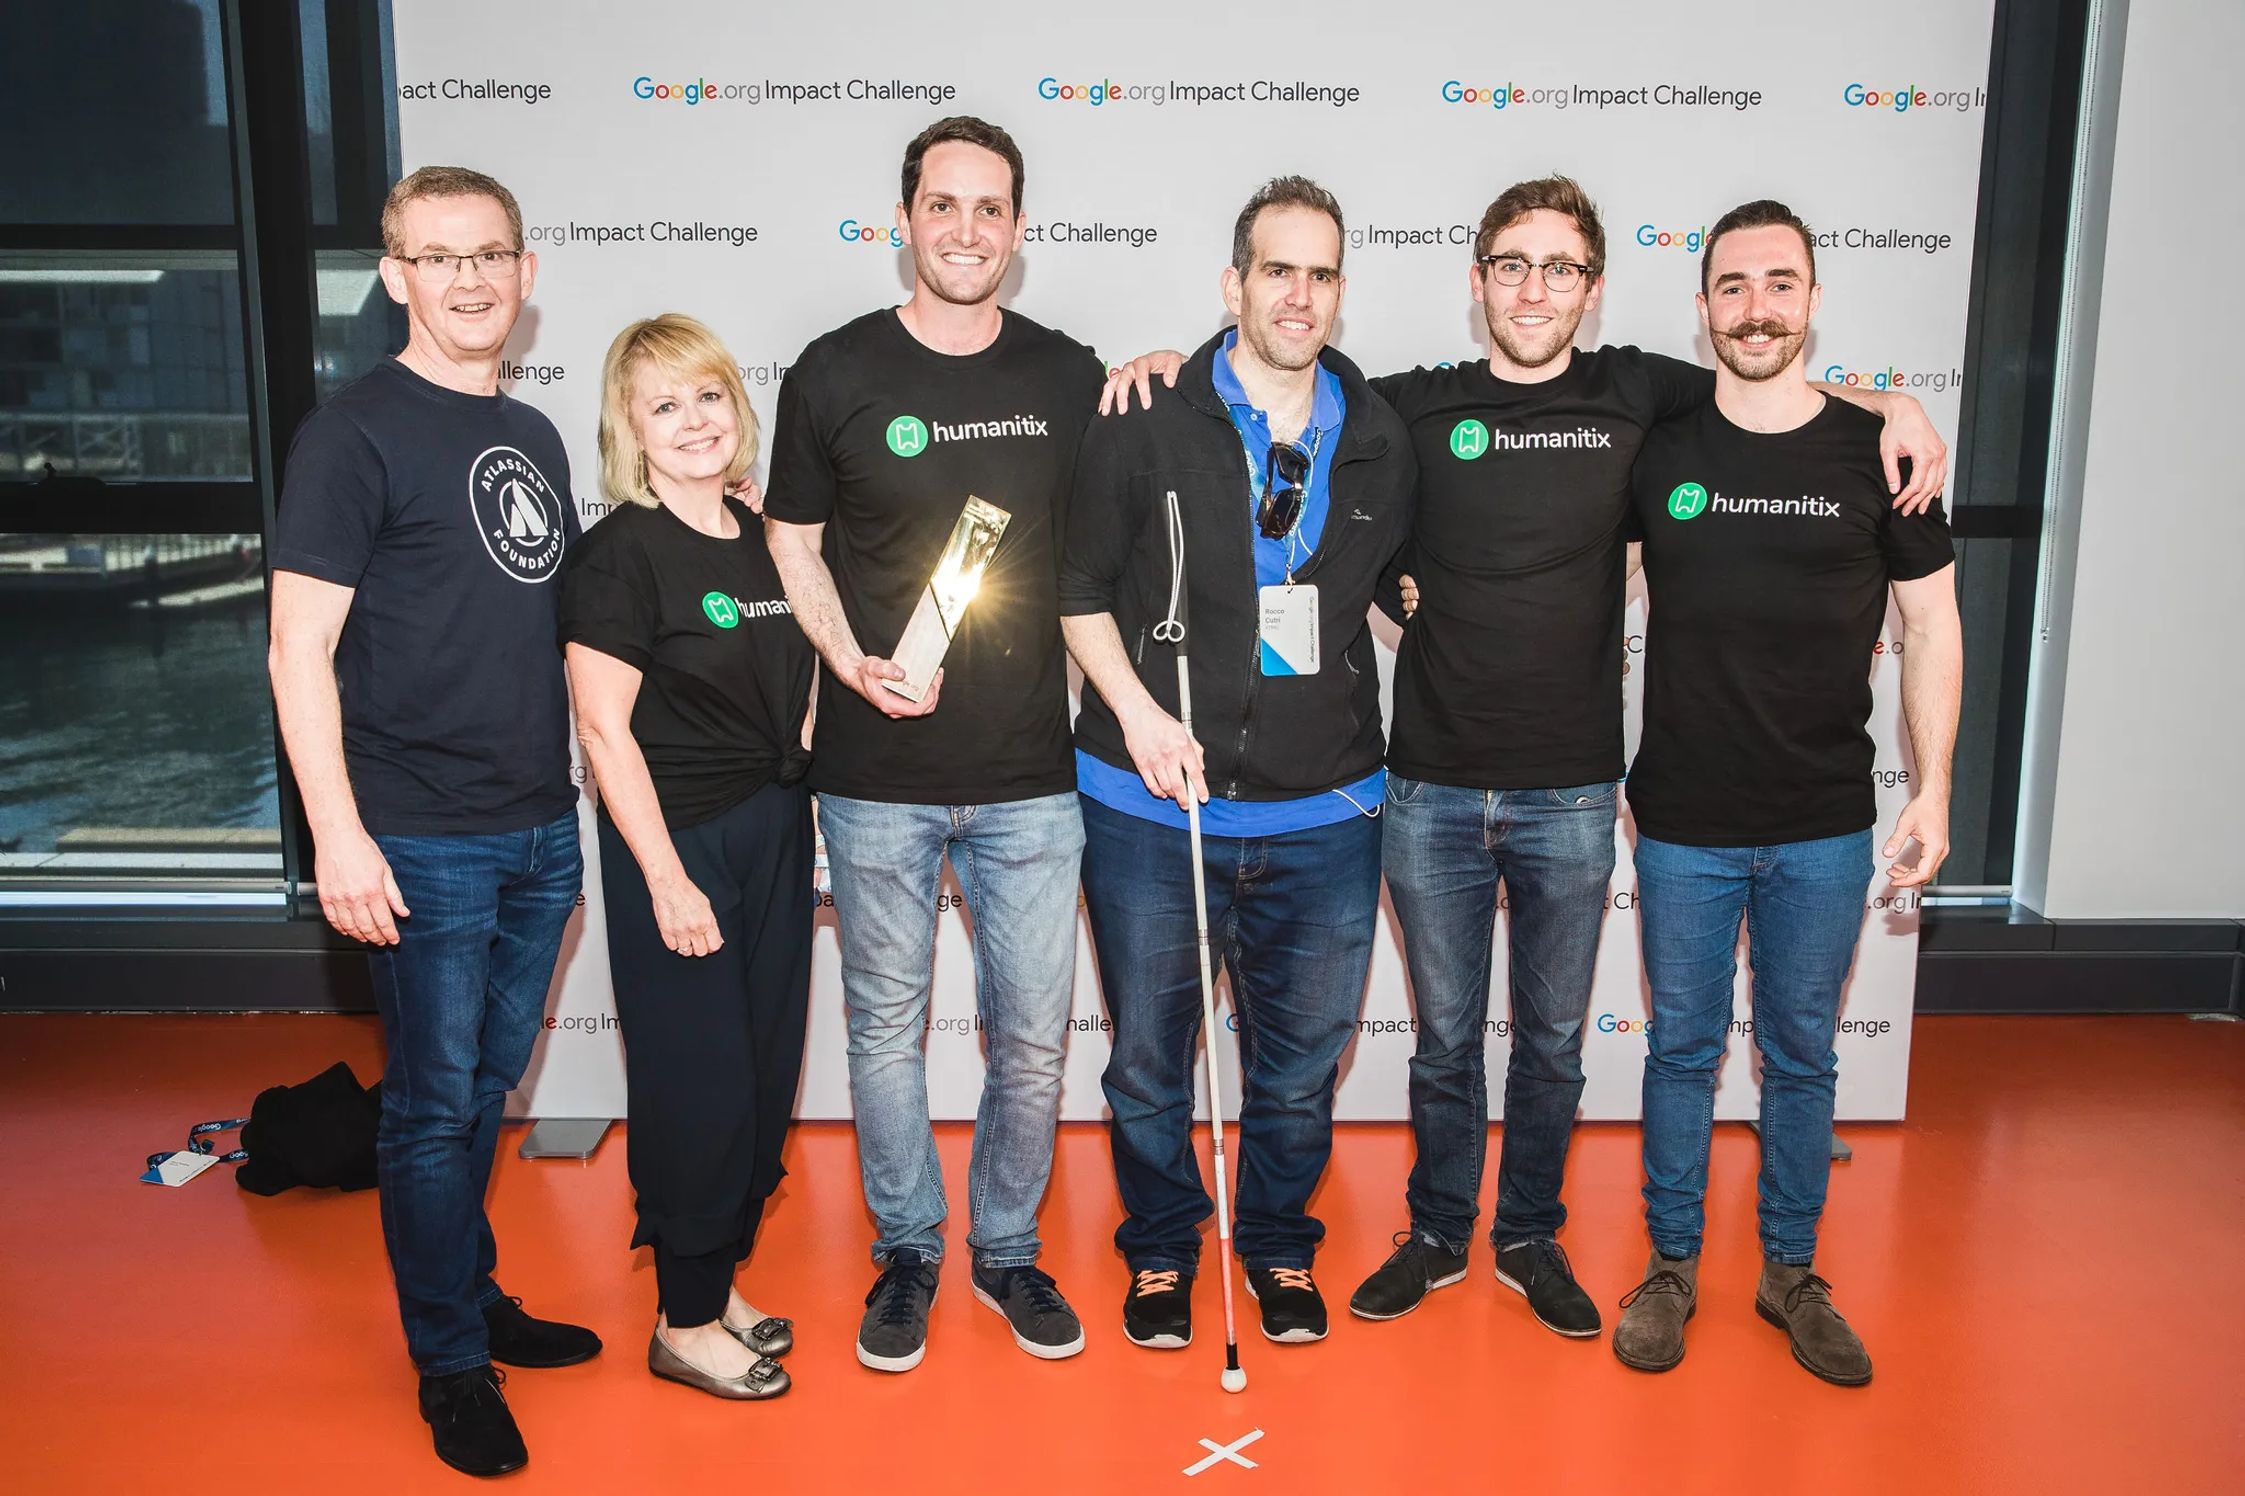 The Humanitix team with Rocco, a person with blindness, at the Google Impact Challenge